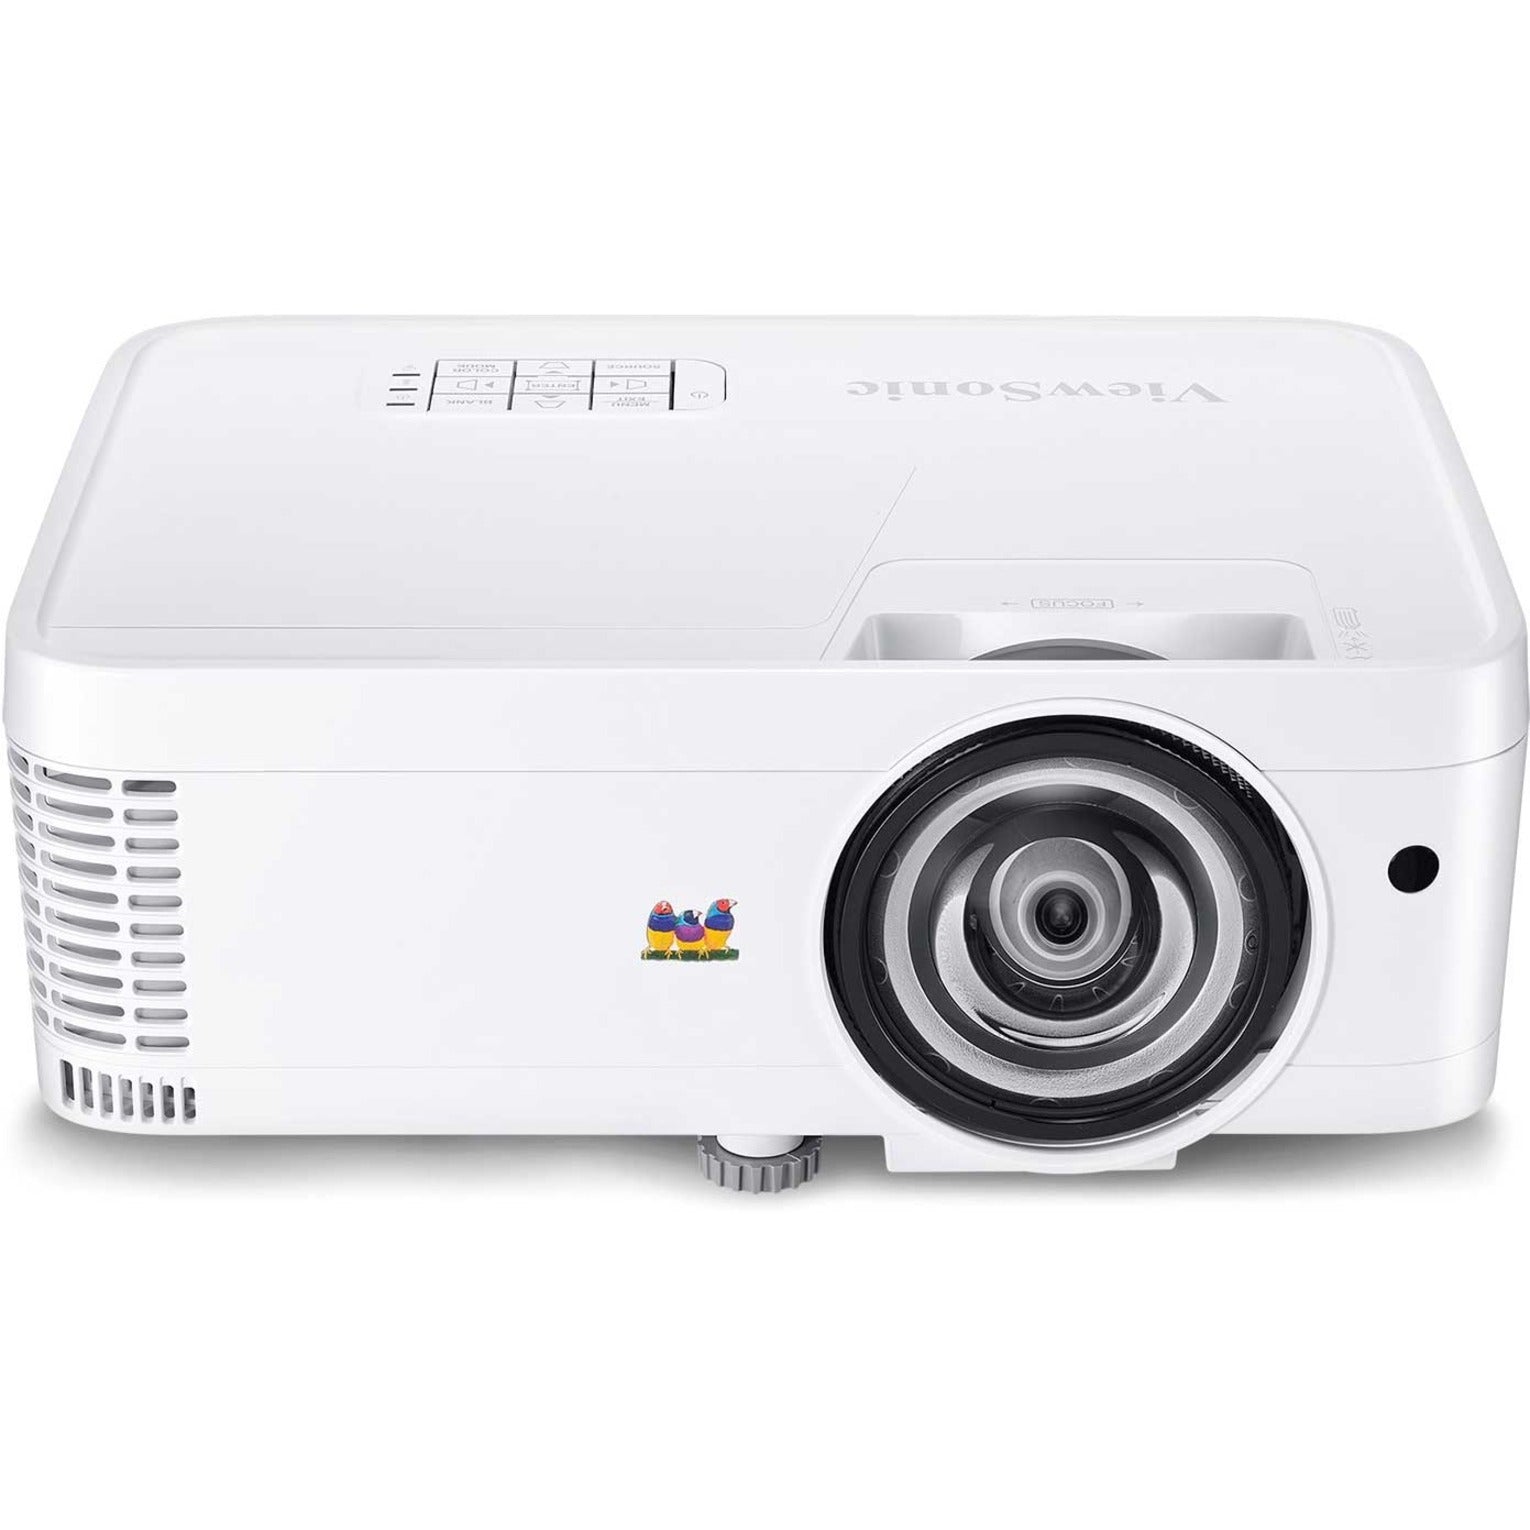 ViewSonic PS600W DLP Projector for Business and Education, Short Throw, 3,500 Lumens, WXGA 1280x800 Resolution